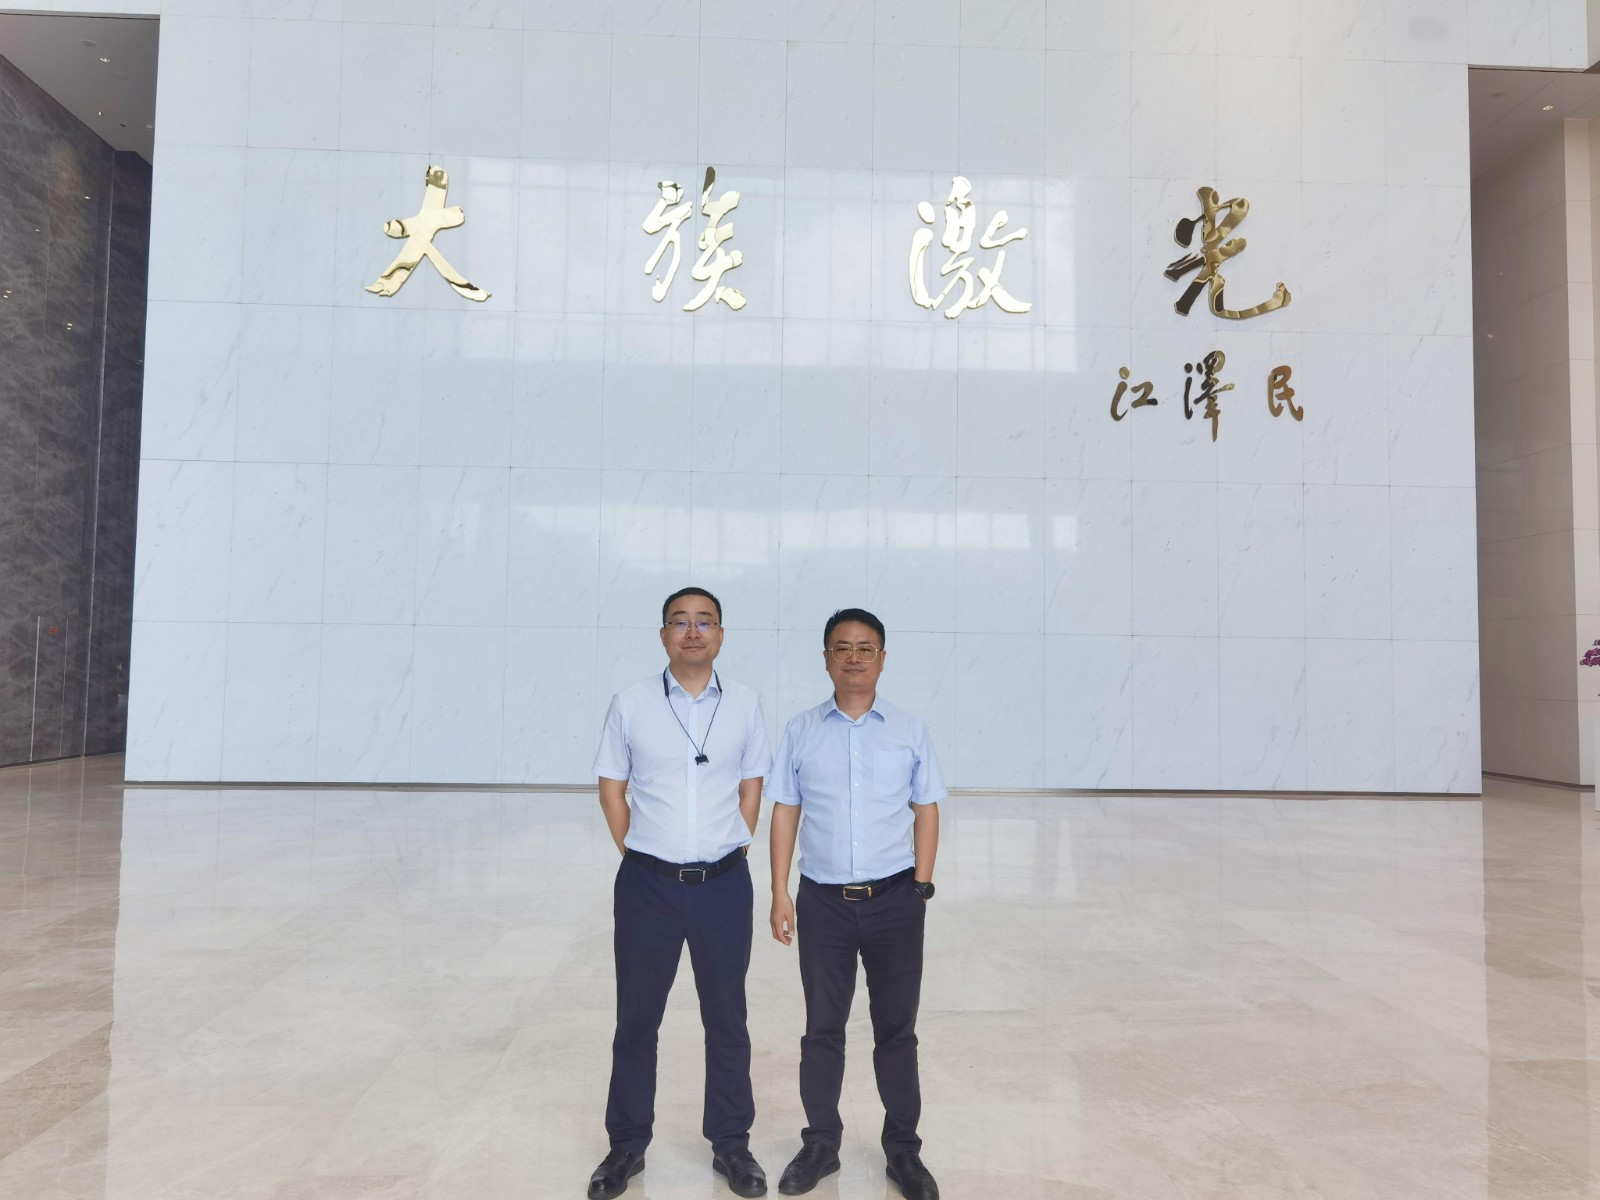 Chairman Luo Linhua and General Manager Wang Lihua Visited Han’s Laser for Learning and Exchange